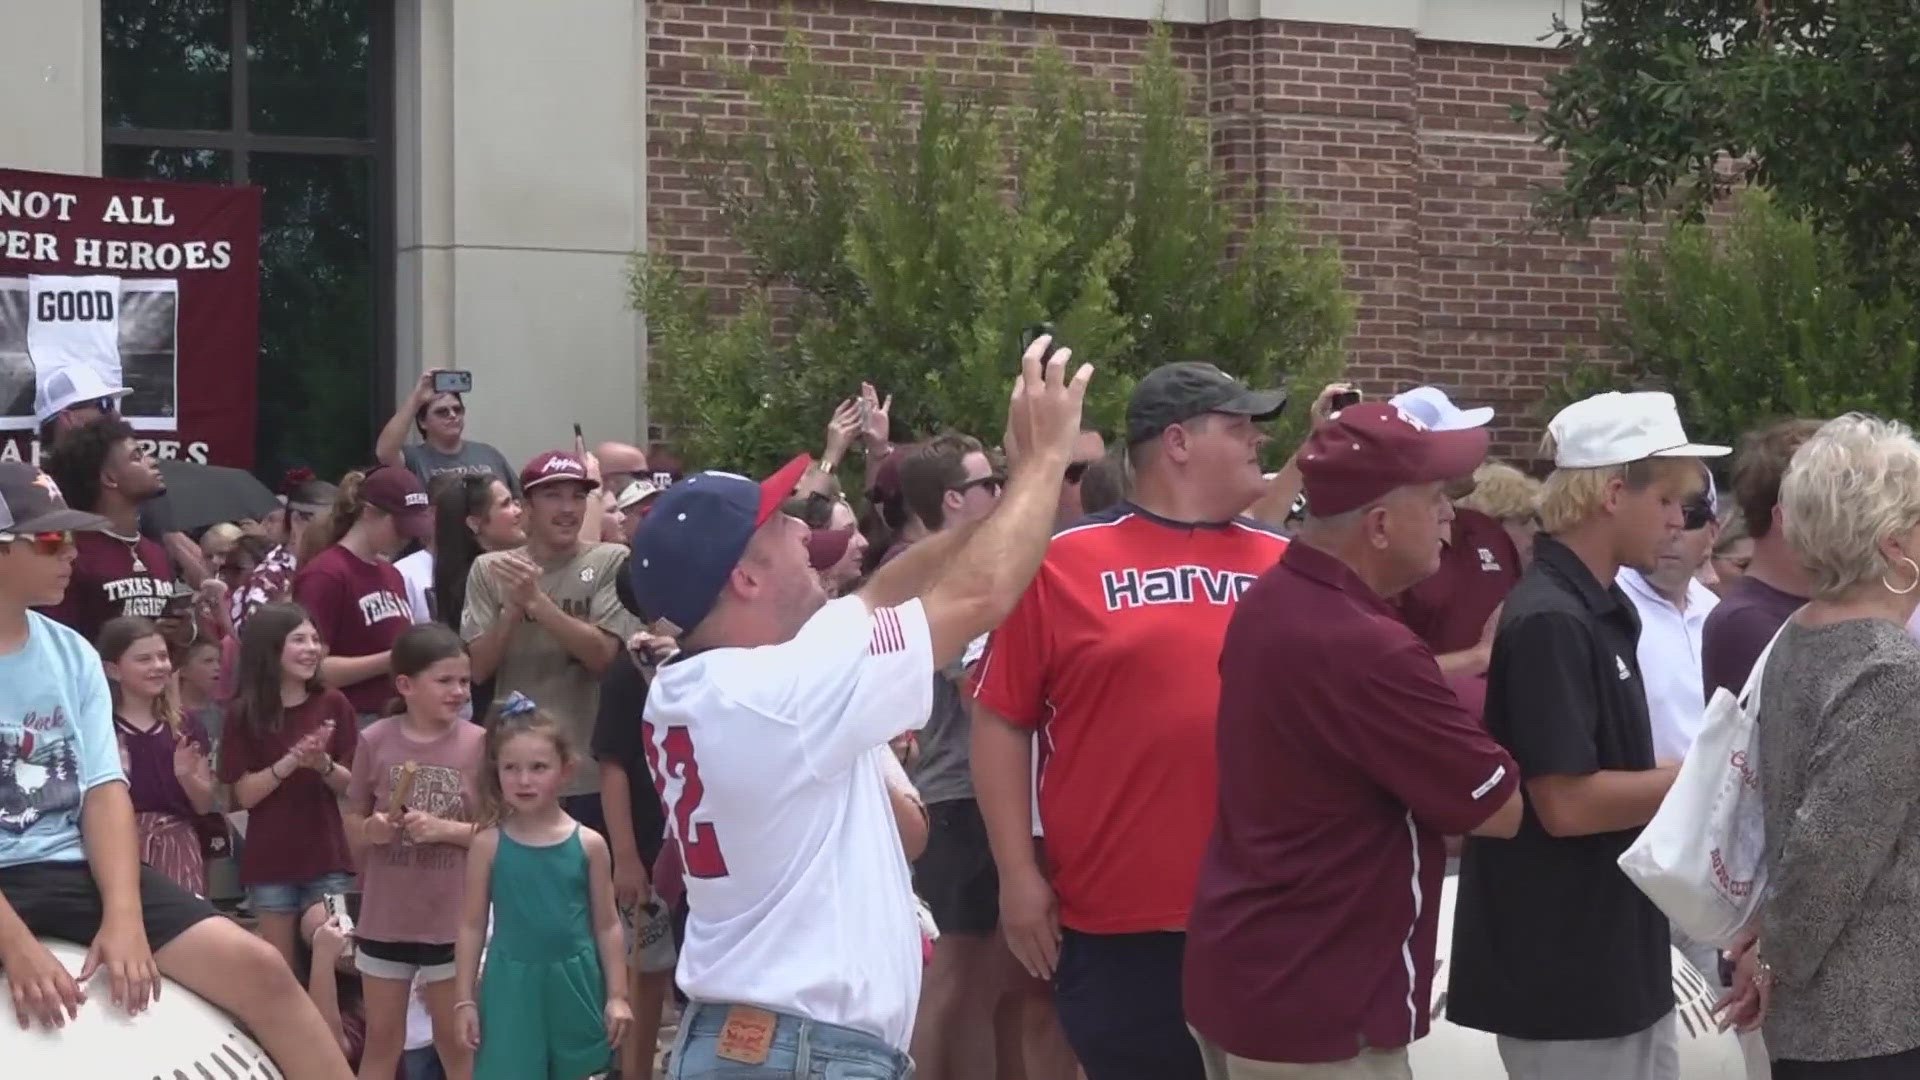 After falling to Tennessee in the College World Series final, Aggie Baseball returned home to a warm welcome from fans.